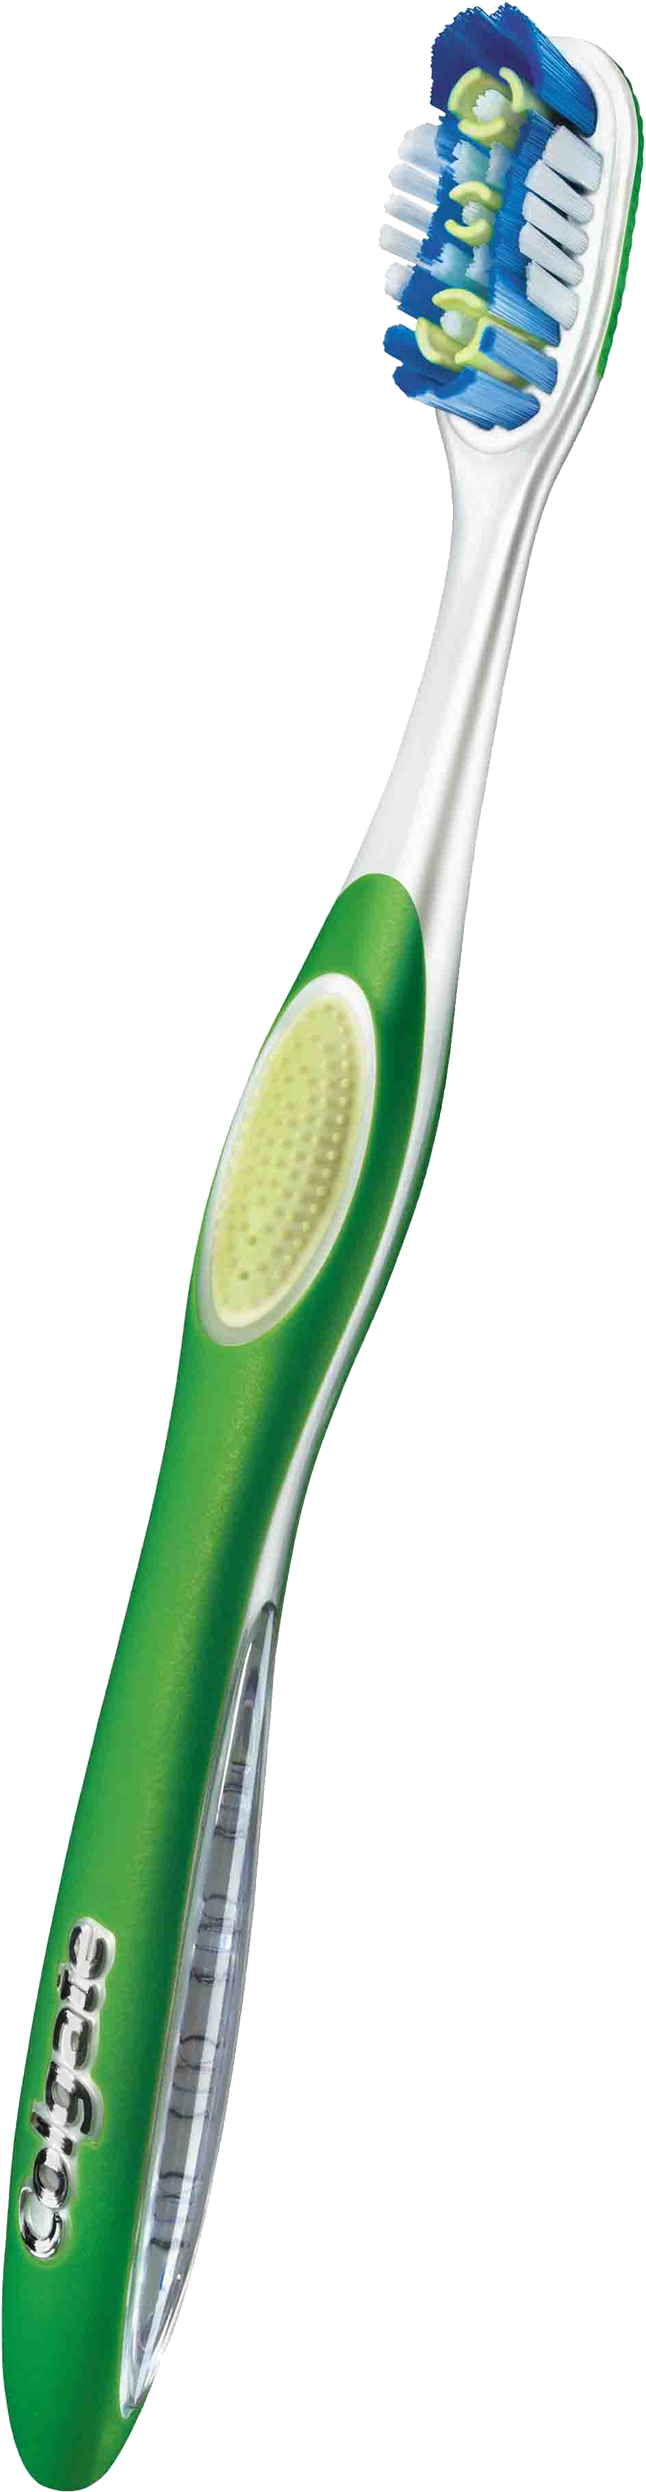 Toothbrush Png Hdpng.com 646 - Toothbrush, Transparent background PNG HD thumbnail